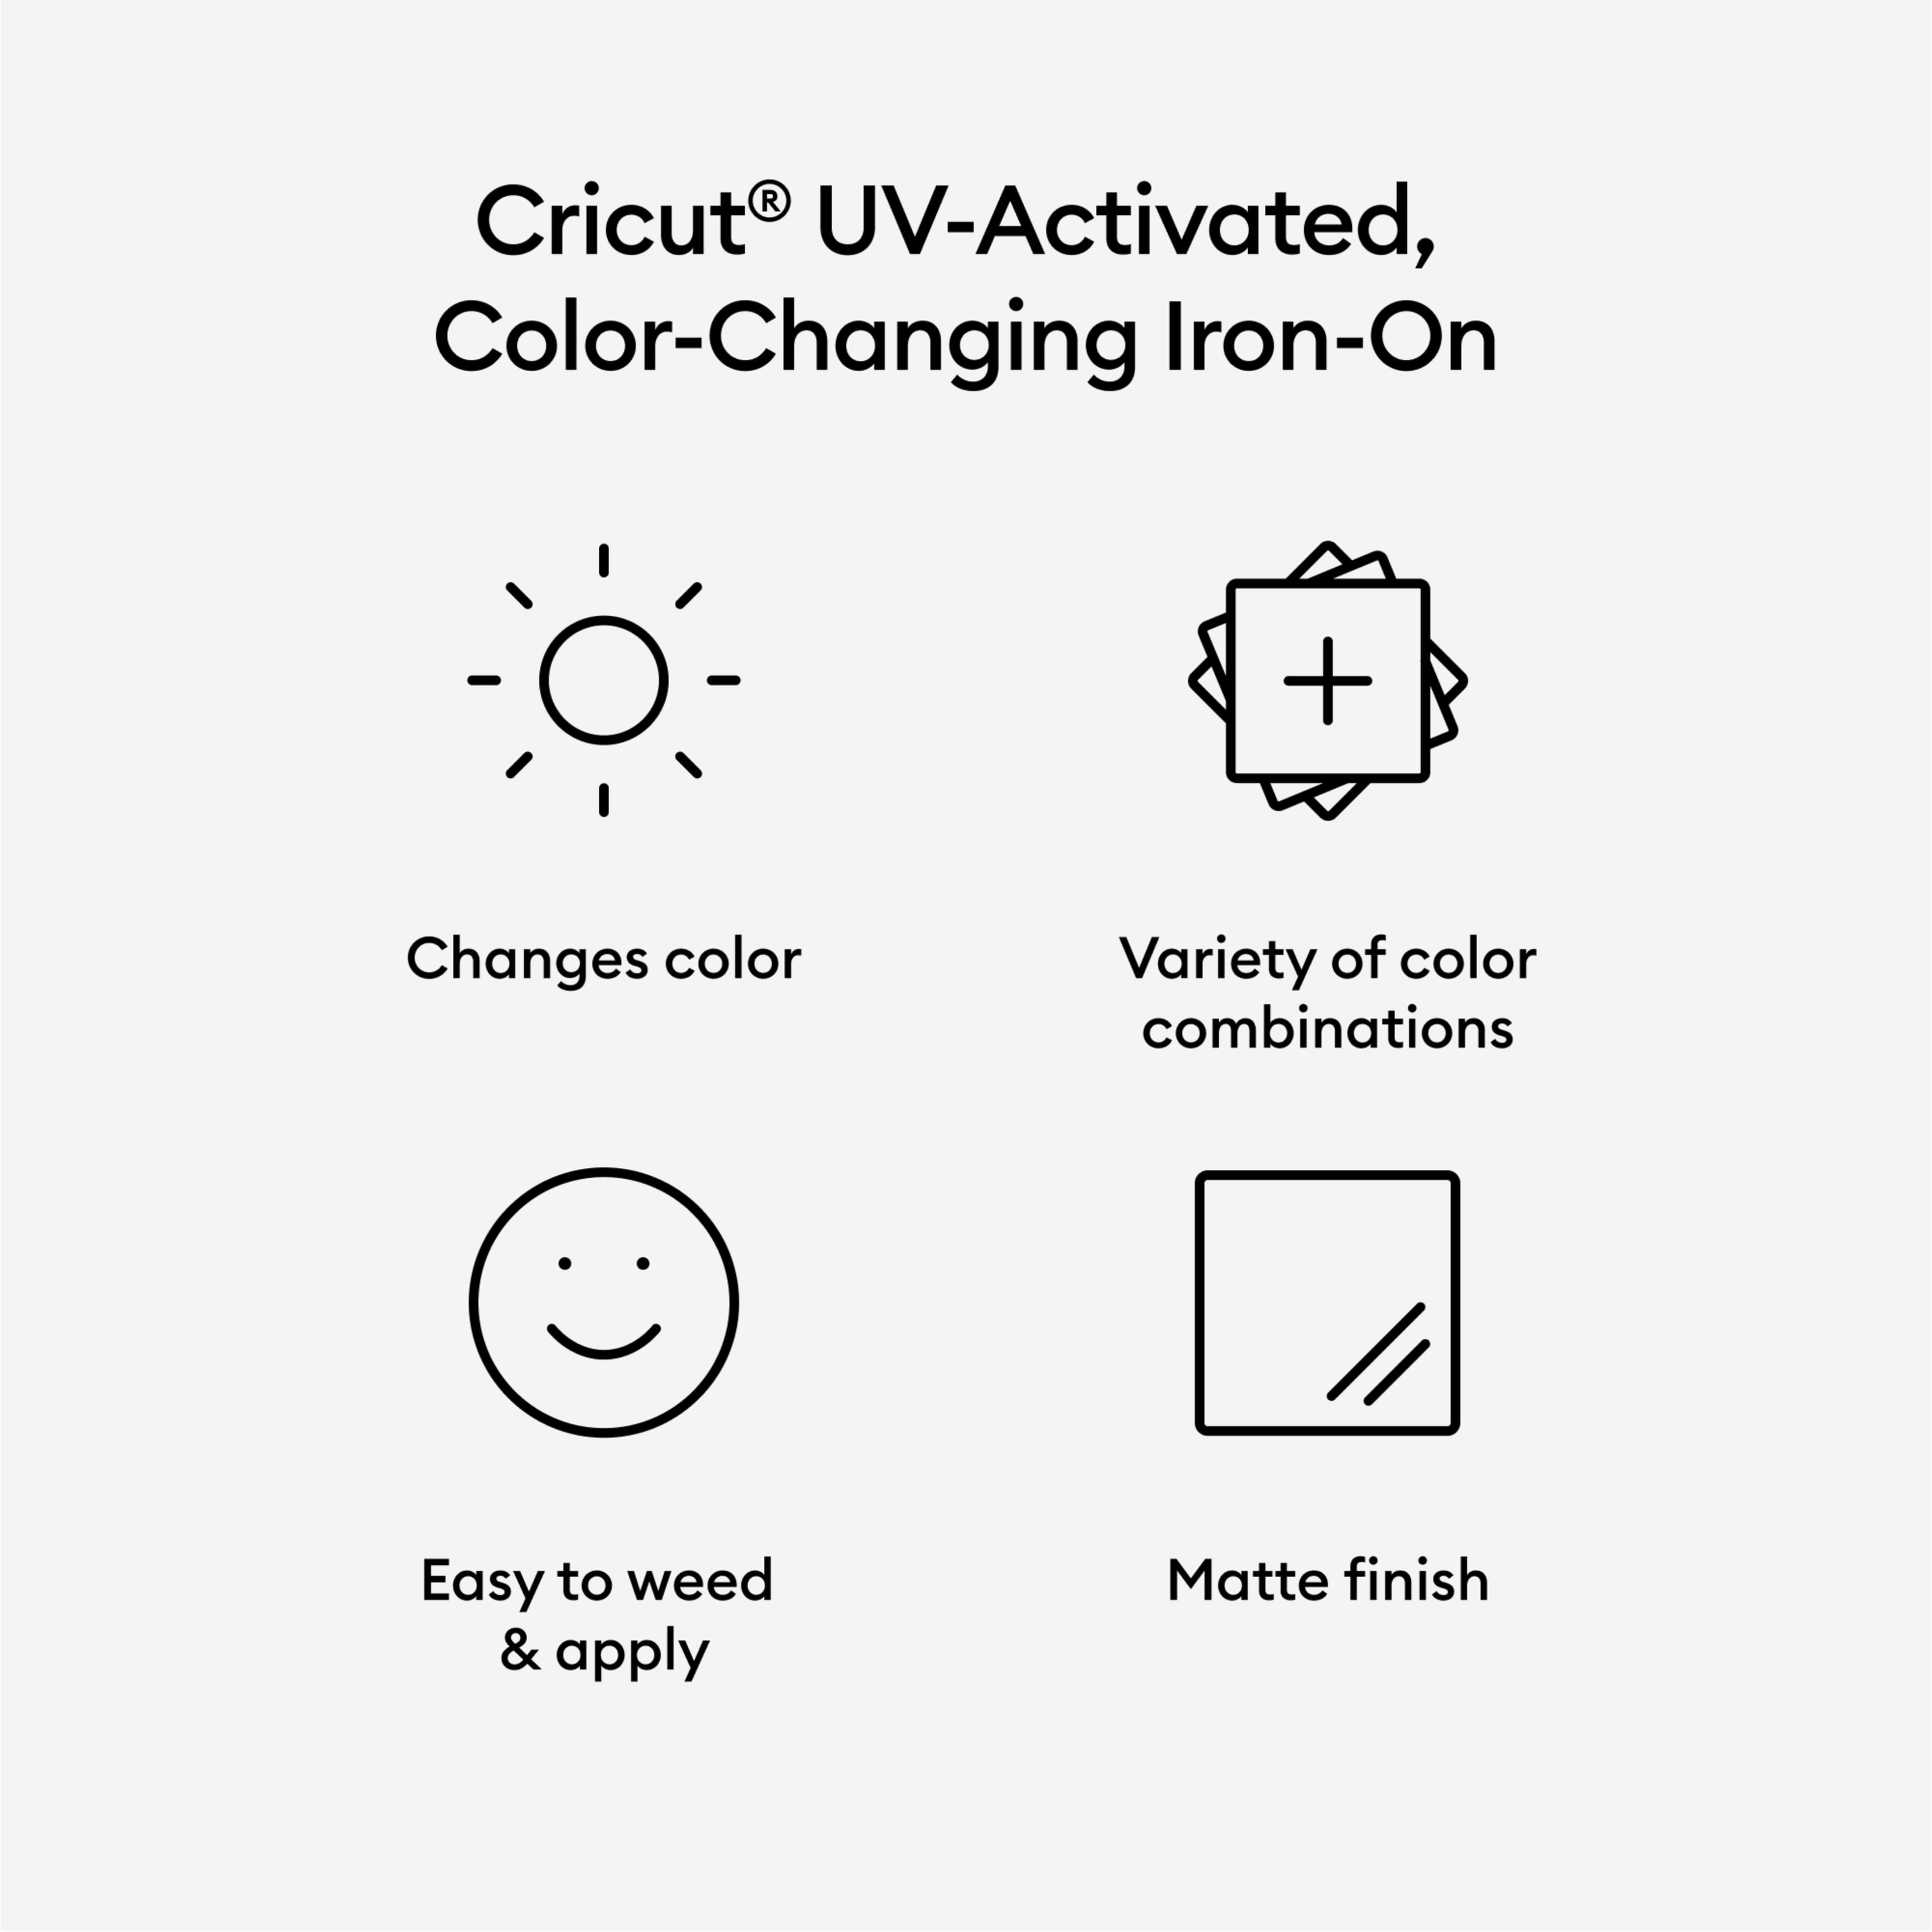 Cricut&#xAE; UV-Activated Color-Changing Iron-On